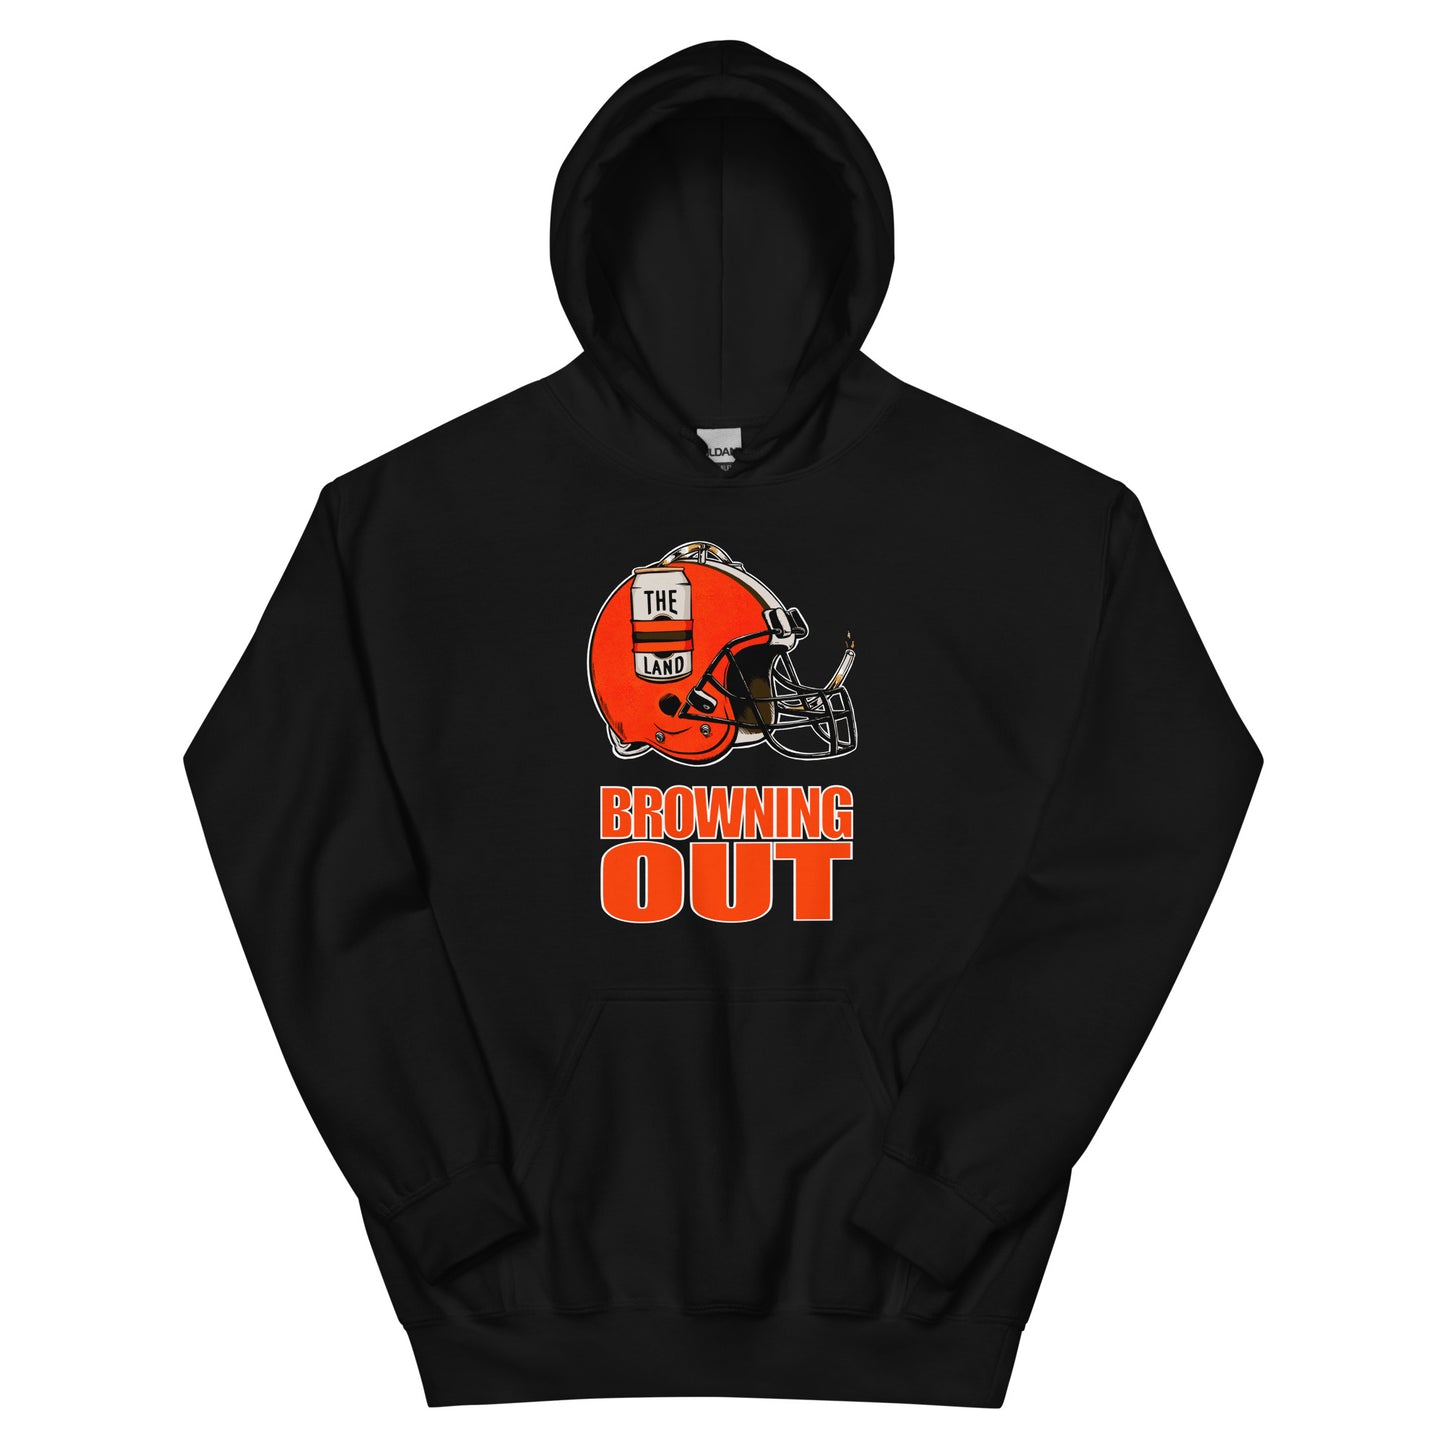 Browning Out Hoodie